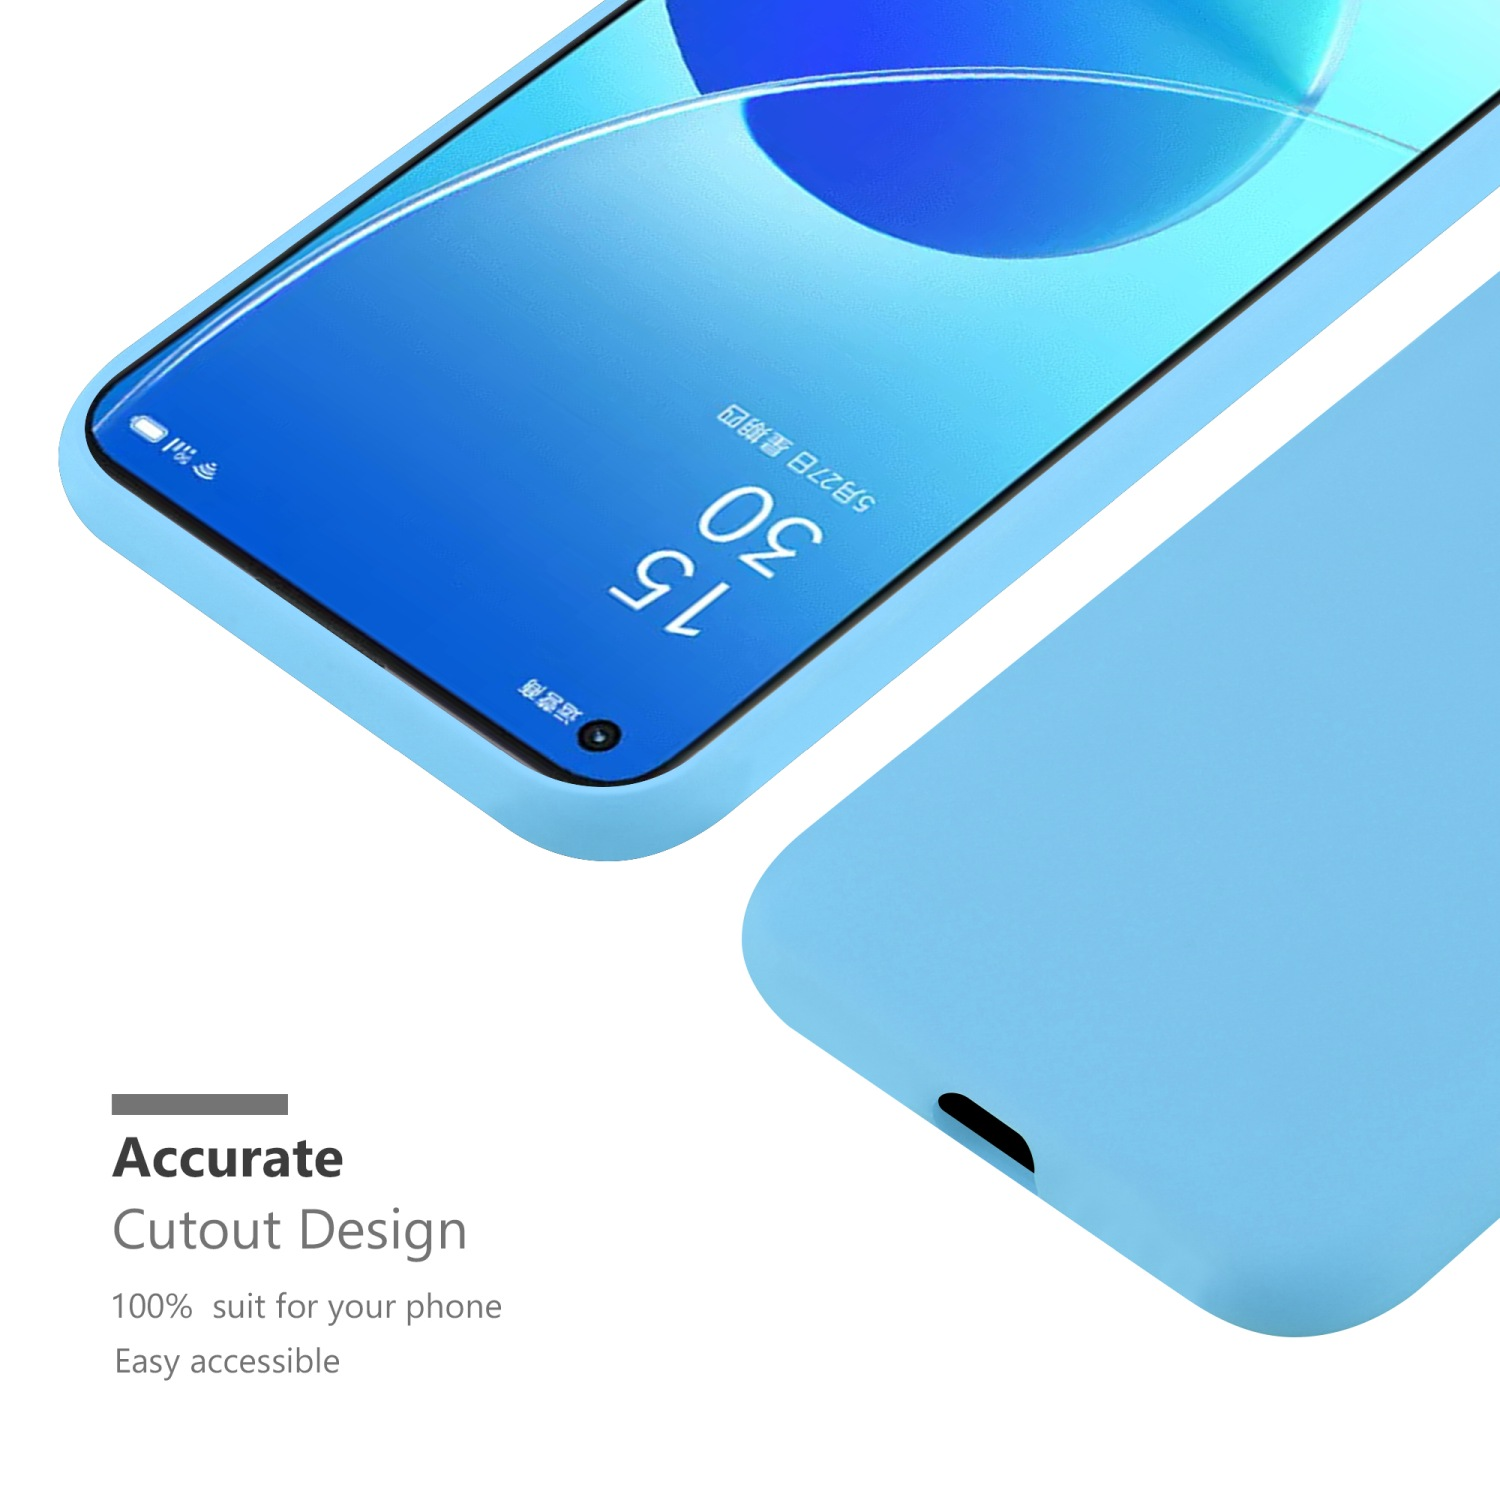 5G, CADORABO CANDY BLAU im Oppo, Hülle Backcover, TPU Candy Reno6 Style,